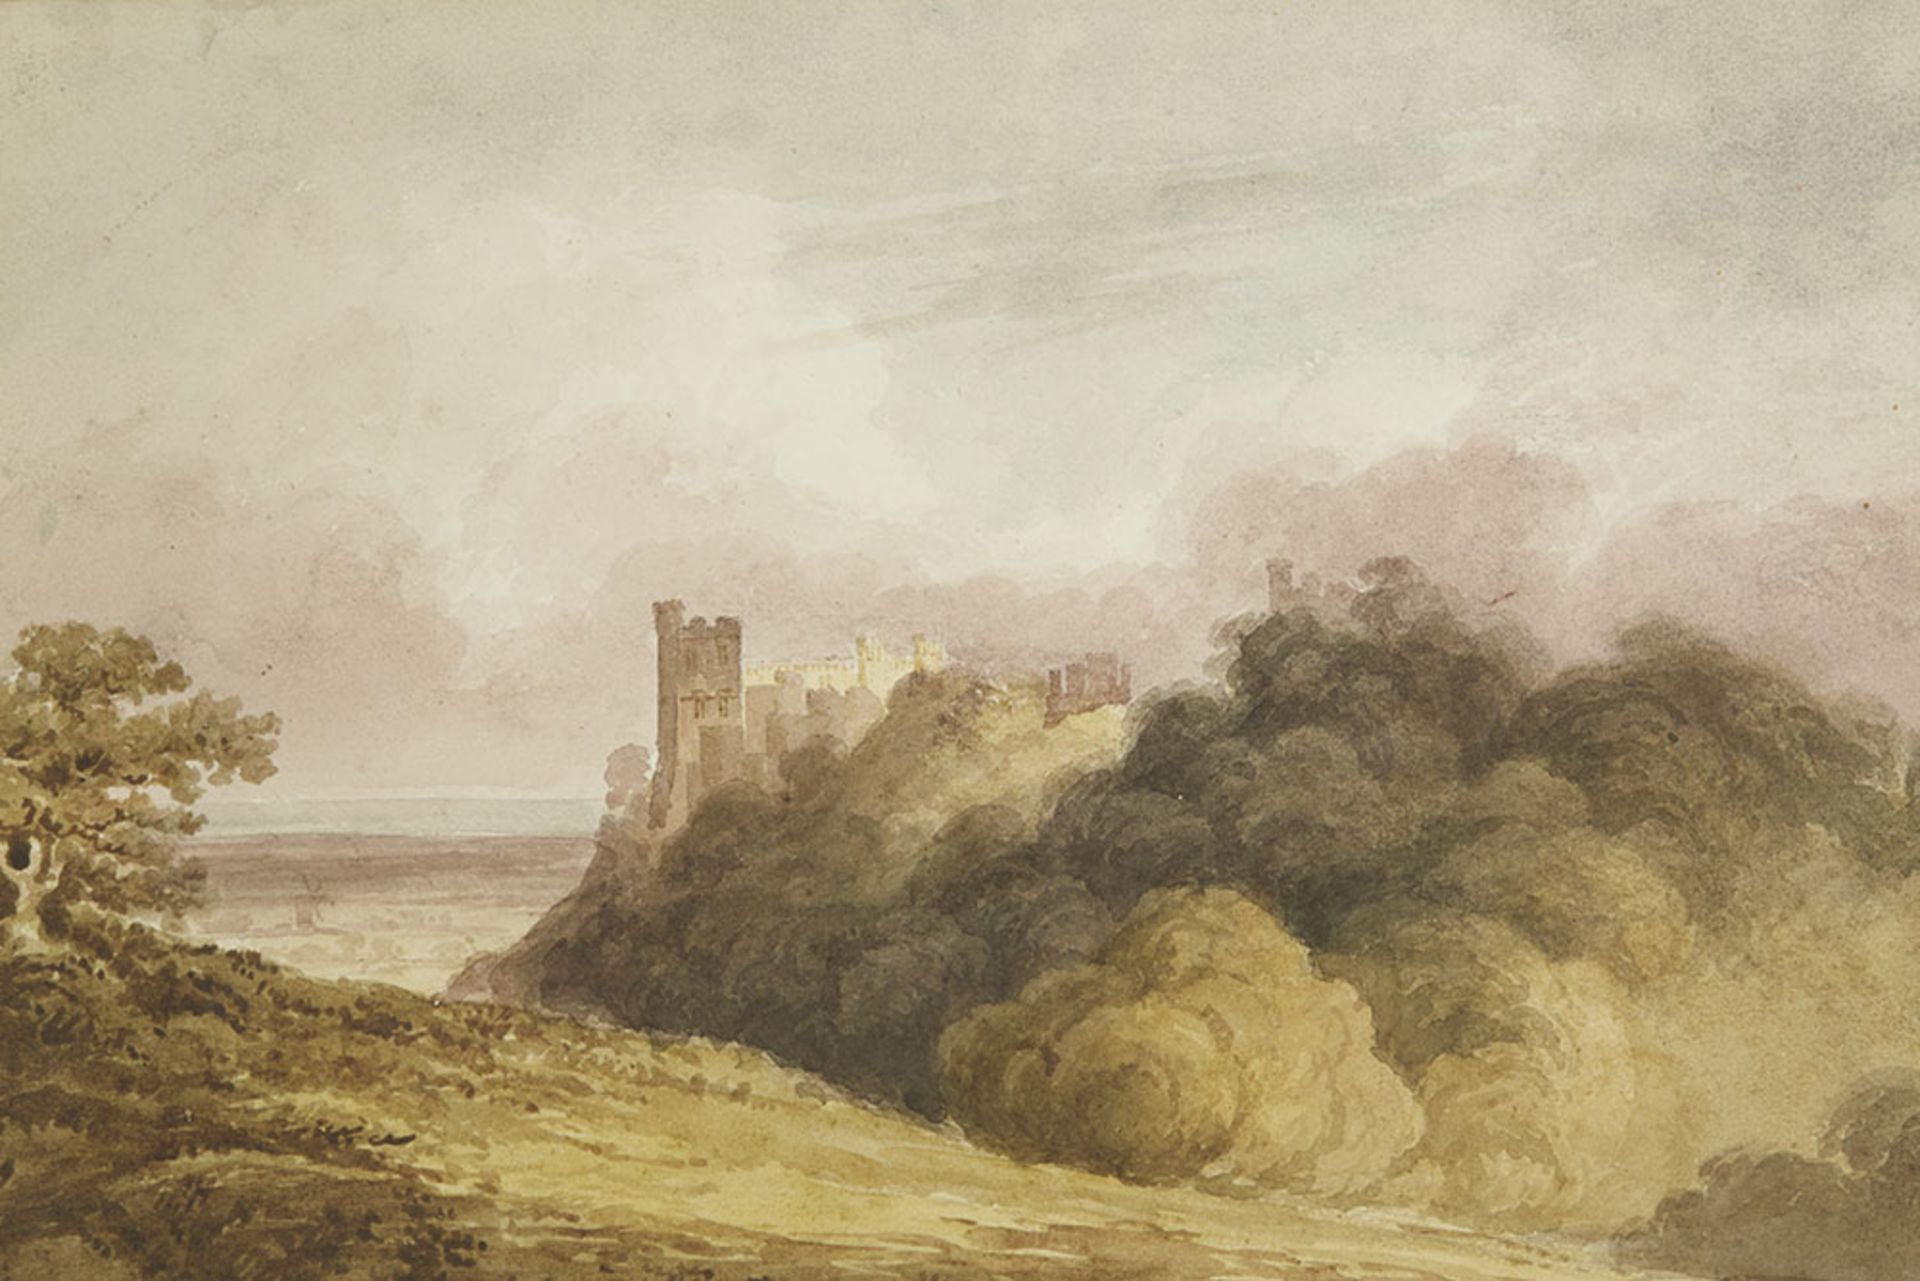 Original Watercolour Painting Arundel Castle By Paul Sandby Munn 1773-1845 - FREE UK DELIVERY - Image 2 of 5